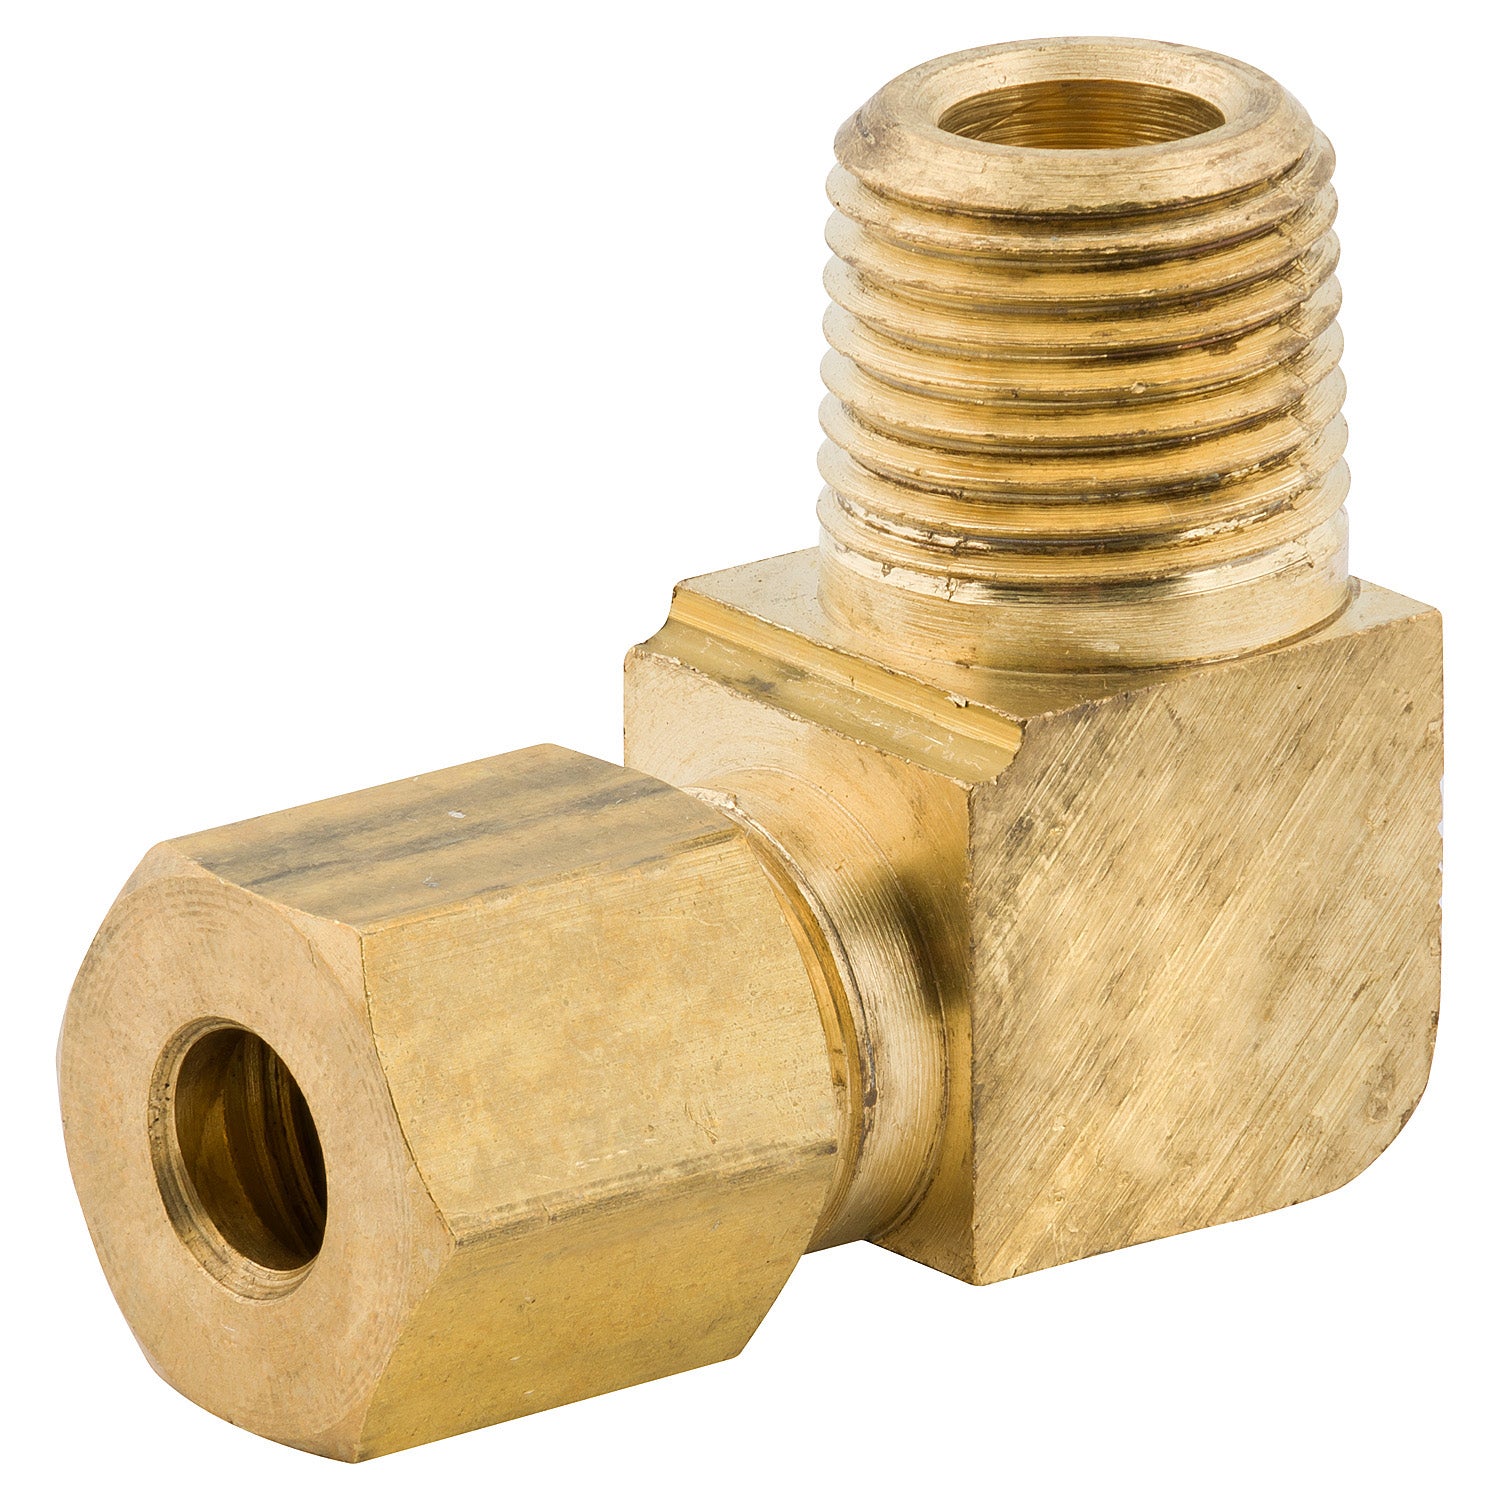 AG Brass Elbow (1/4 BSP Female to 3/8 Compression)